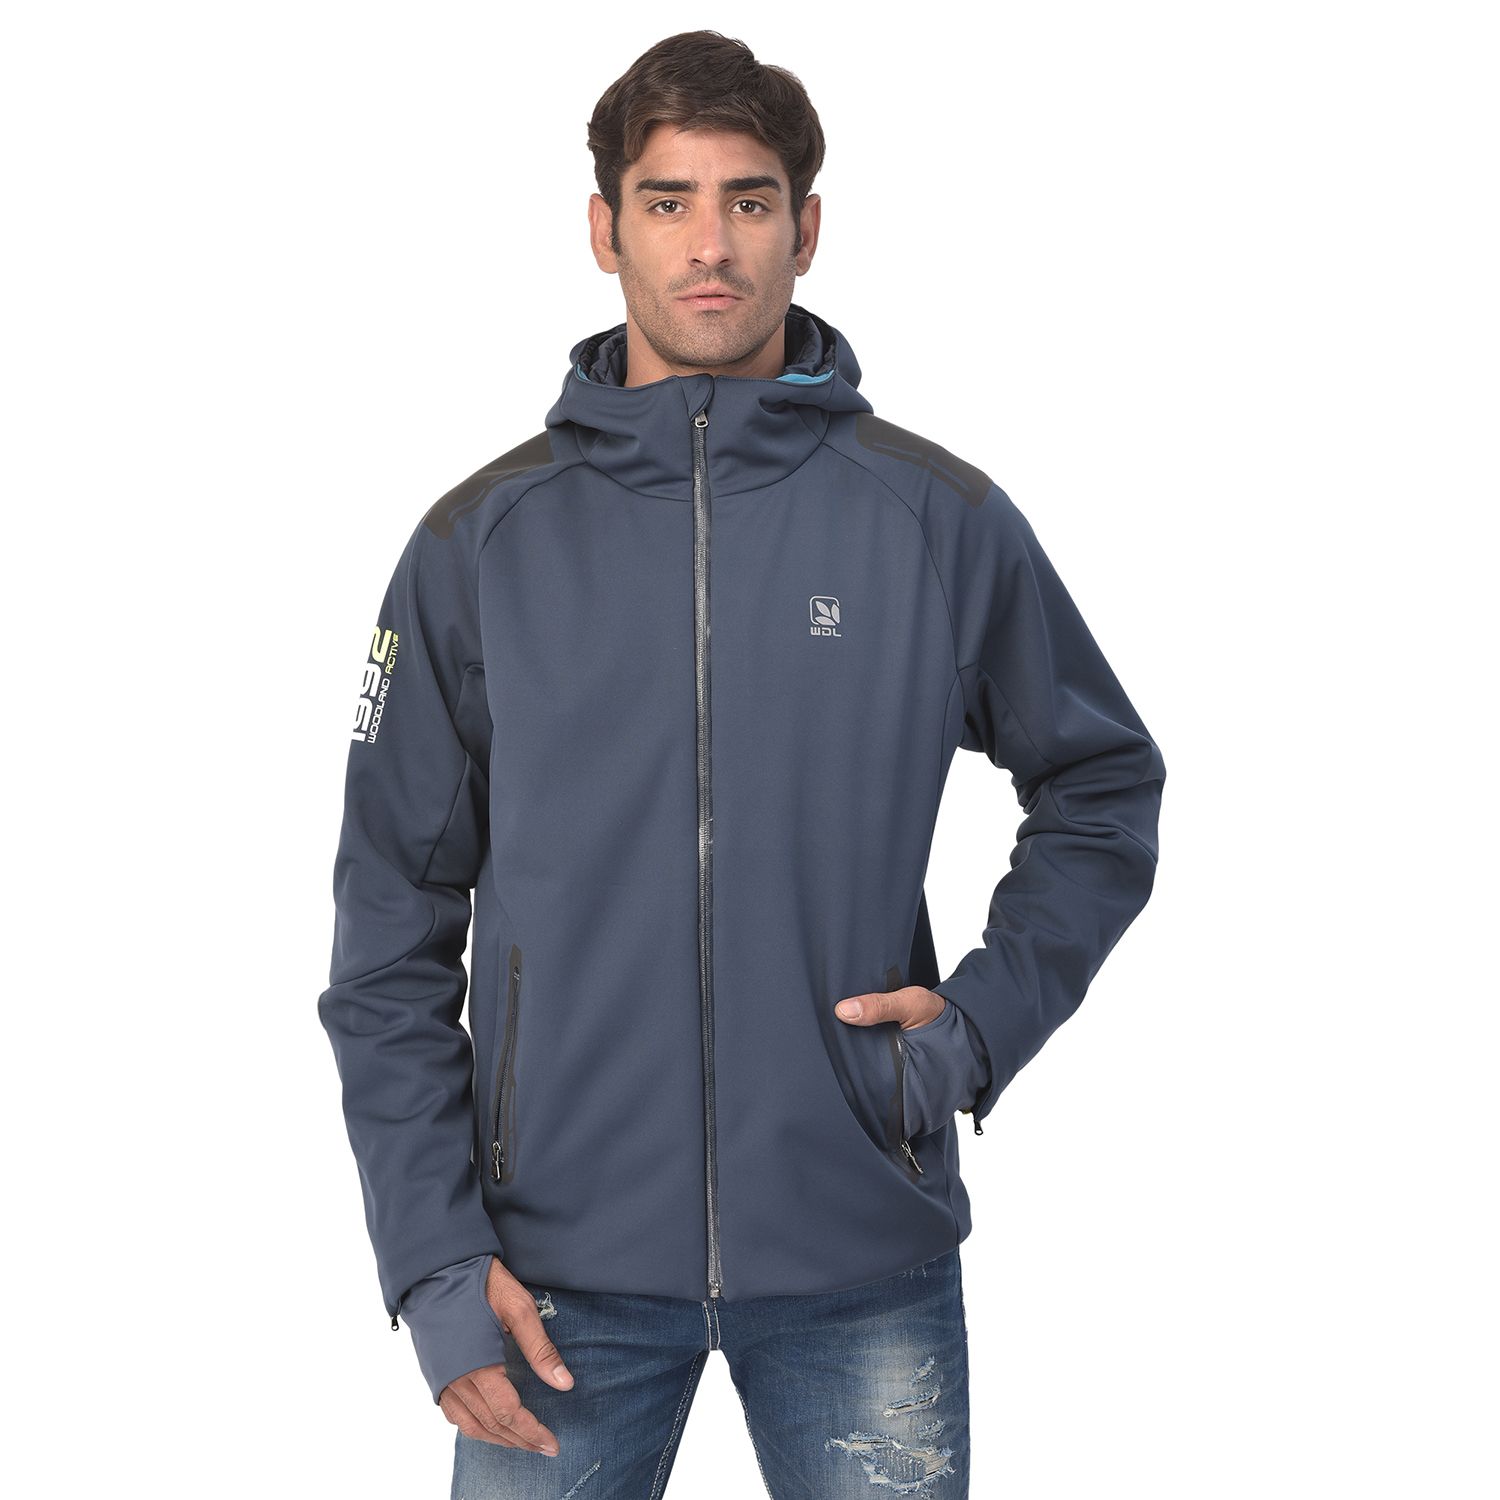 Buy Woodland Navy Polyester Hooded Jacket for Men's Online @ Tata CLiQ